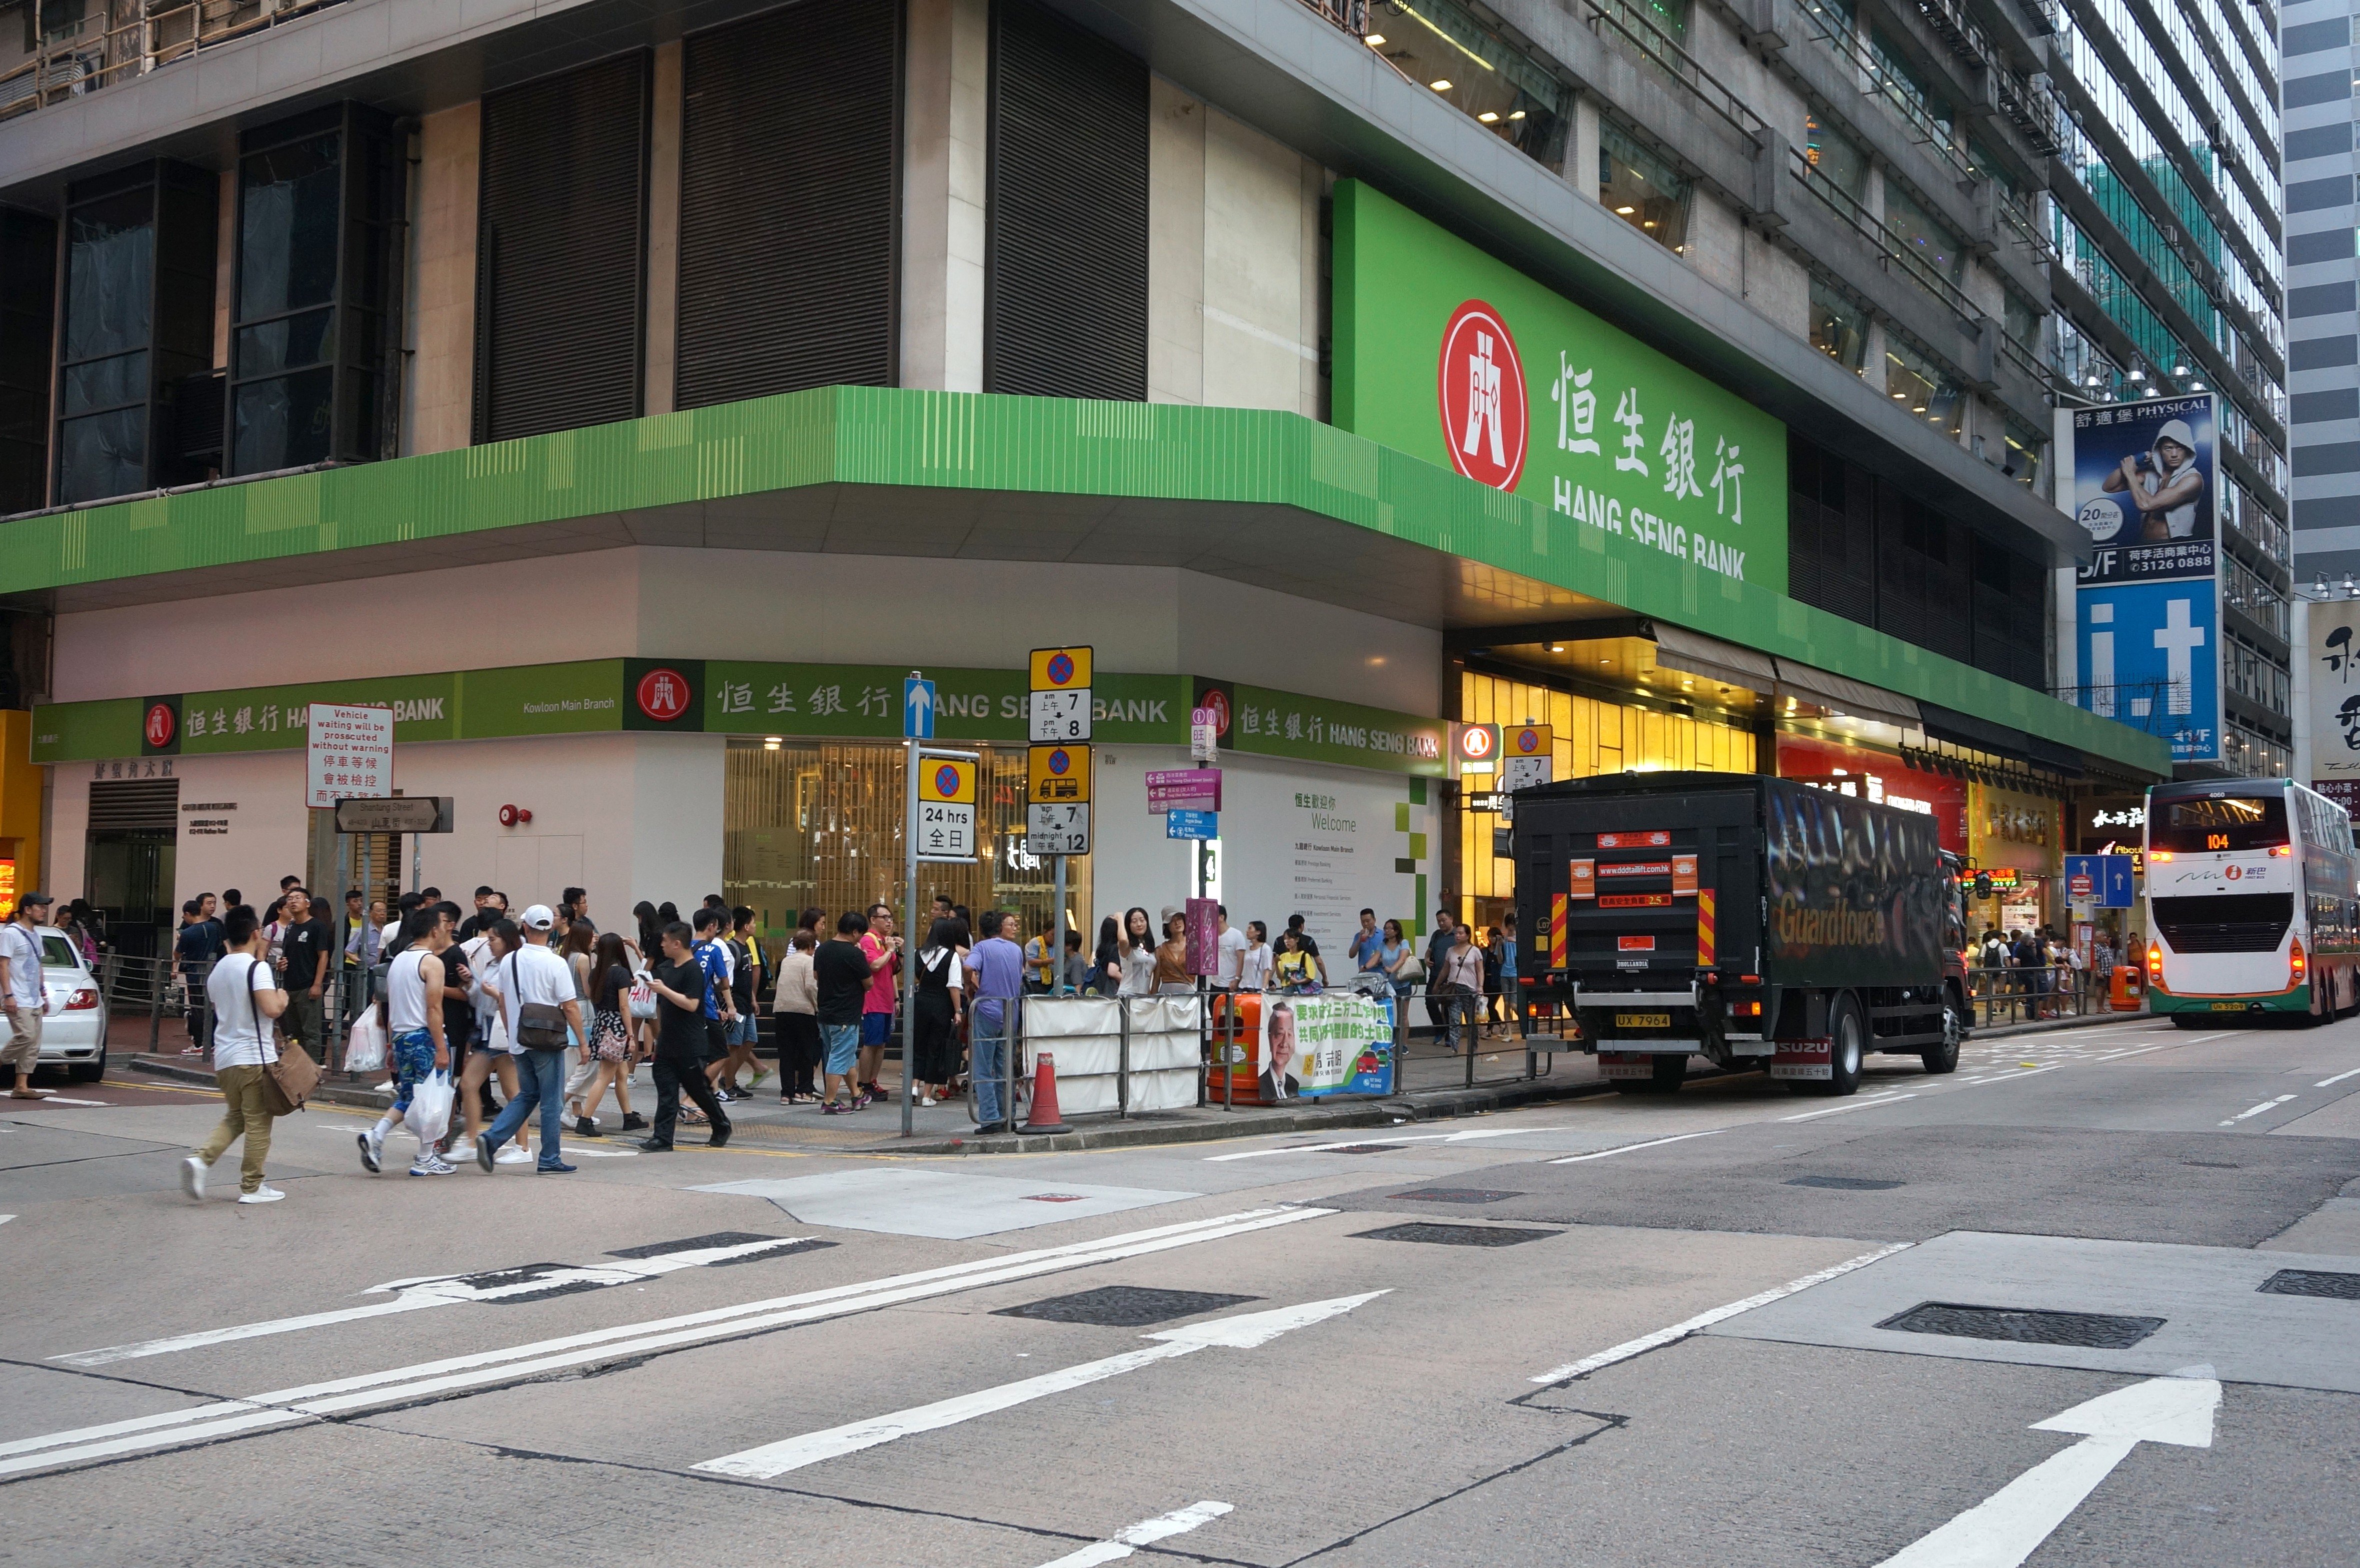 A Hang Seng Bank branch in Hong Kong. Lending by retail banks in the city was up by 12.8 per cent in the first nine months of 2017. Photo: Chang Kim-fung